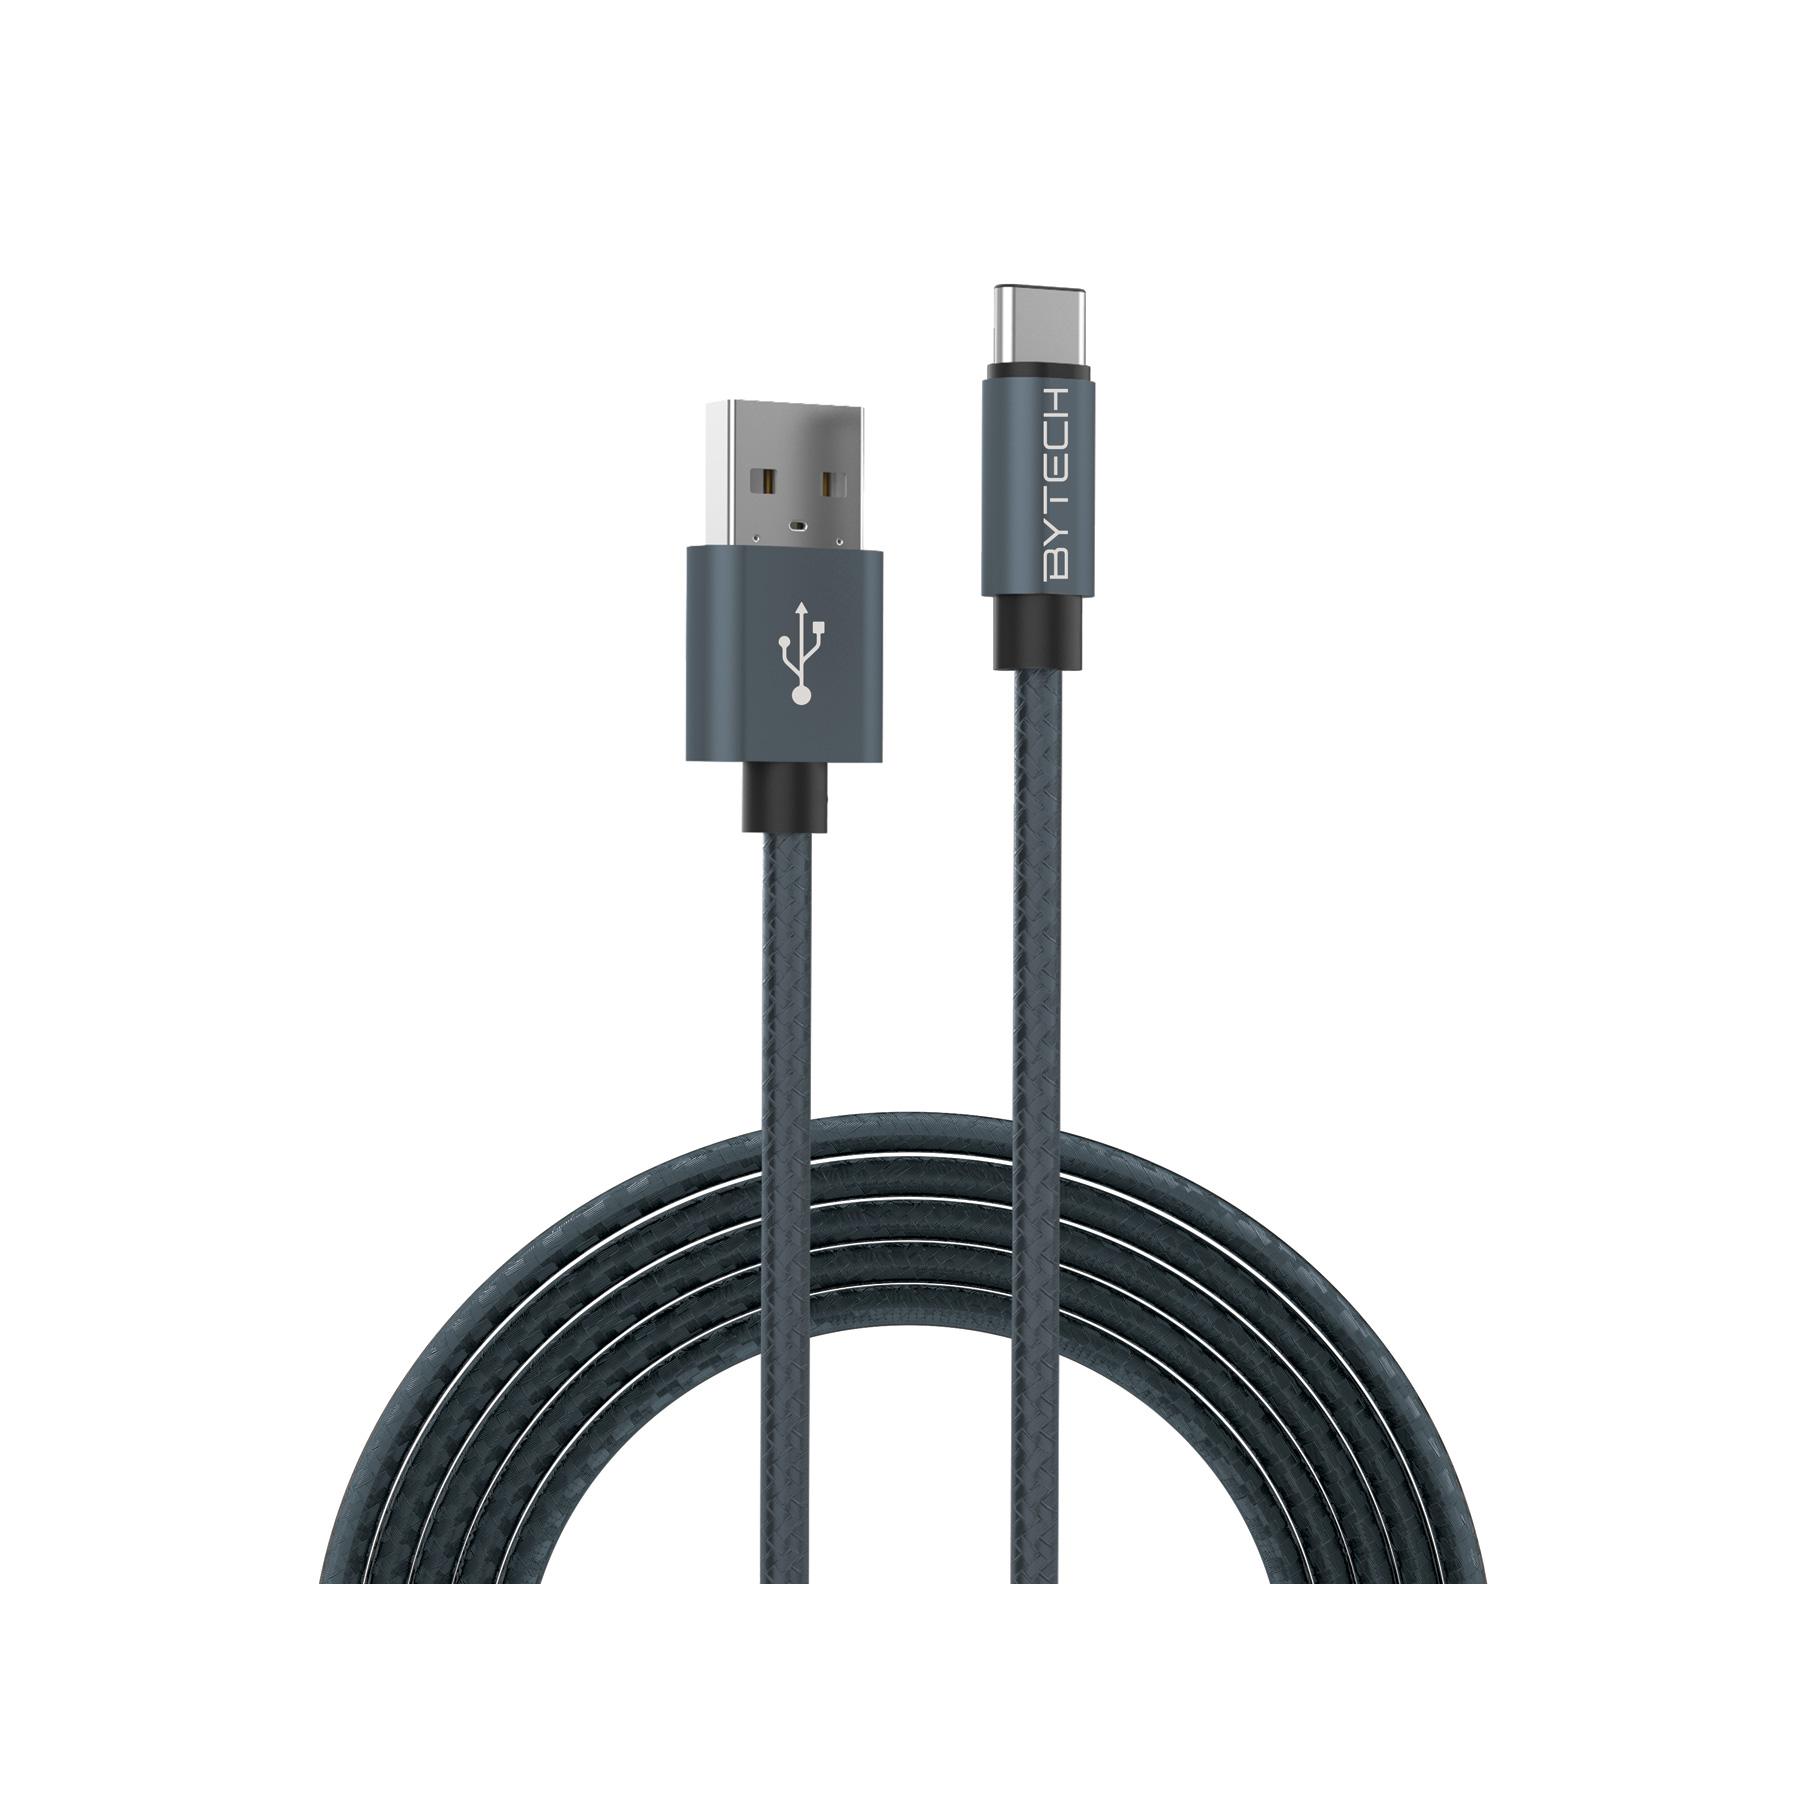 PHONE CABLE 6' TYPE C TO USB ASST